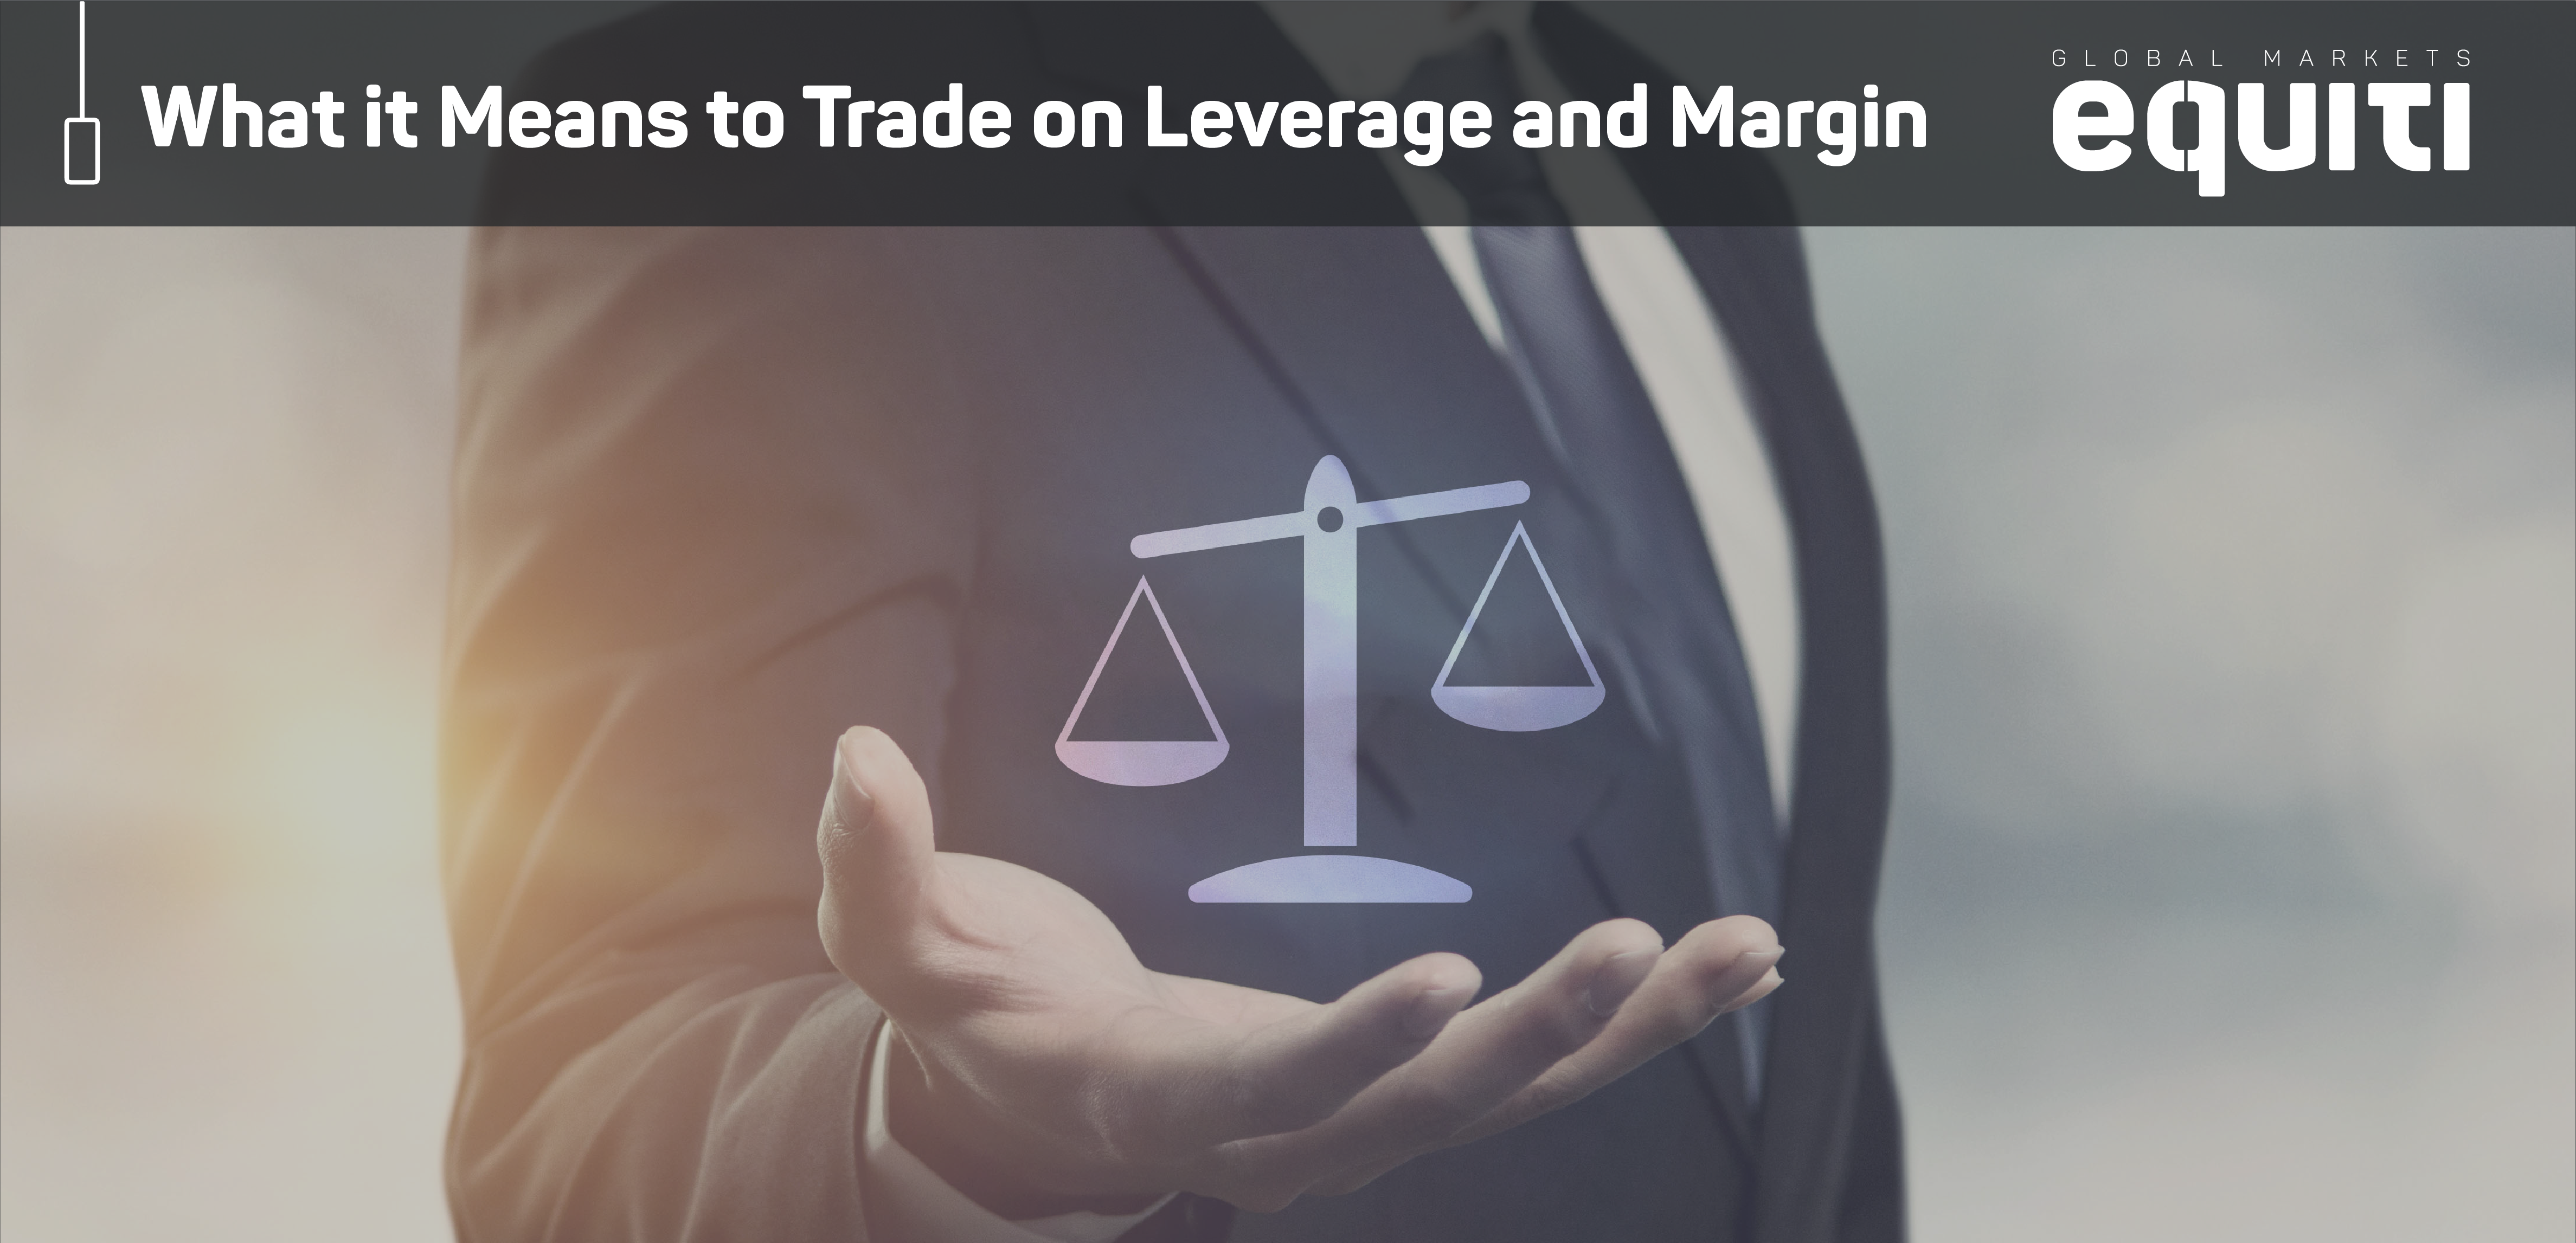 What it Means to Trade on Leverage and Margin